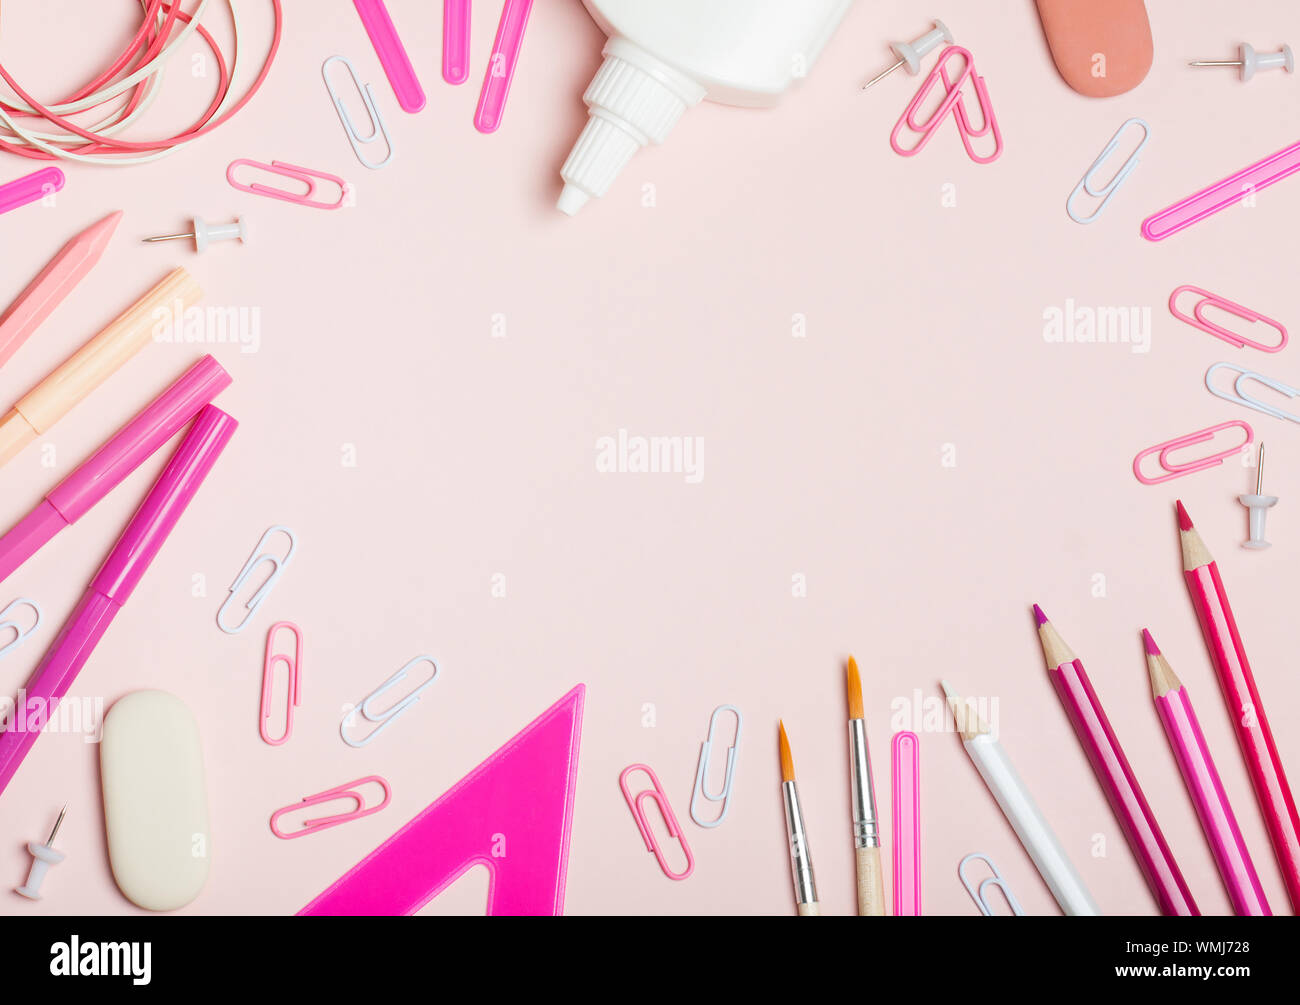 School supplies of pink and white colors on a pink background. Female or  girlish still life on the topic of school, study, office work Stock Photo -  Alamy